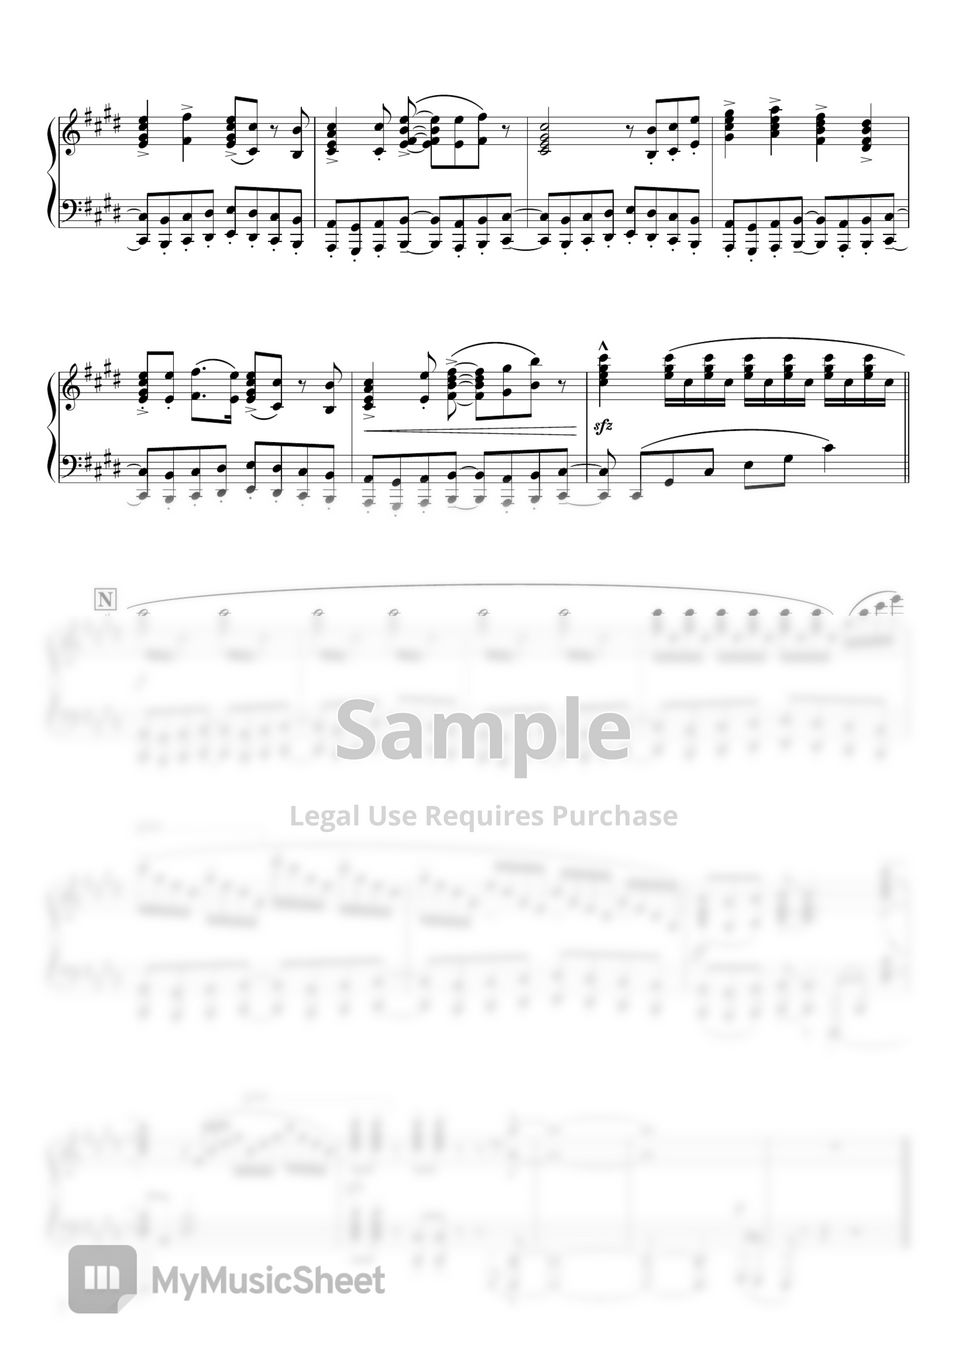 Soul Eater - Resonance (incomplete) Sheet Music by for Various